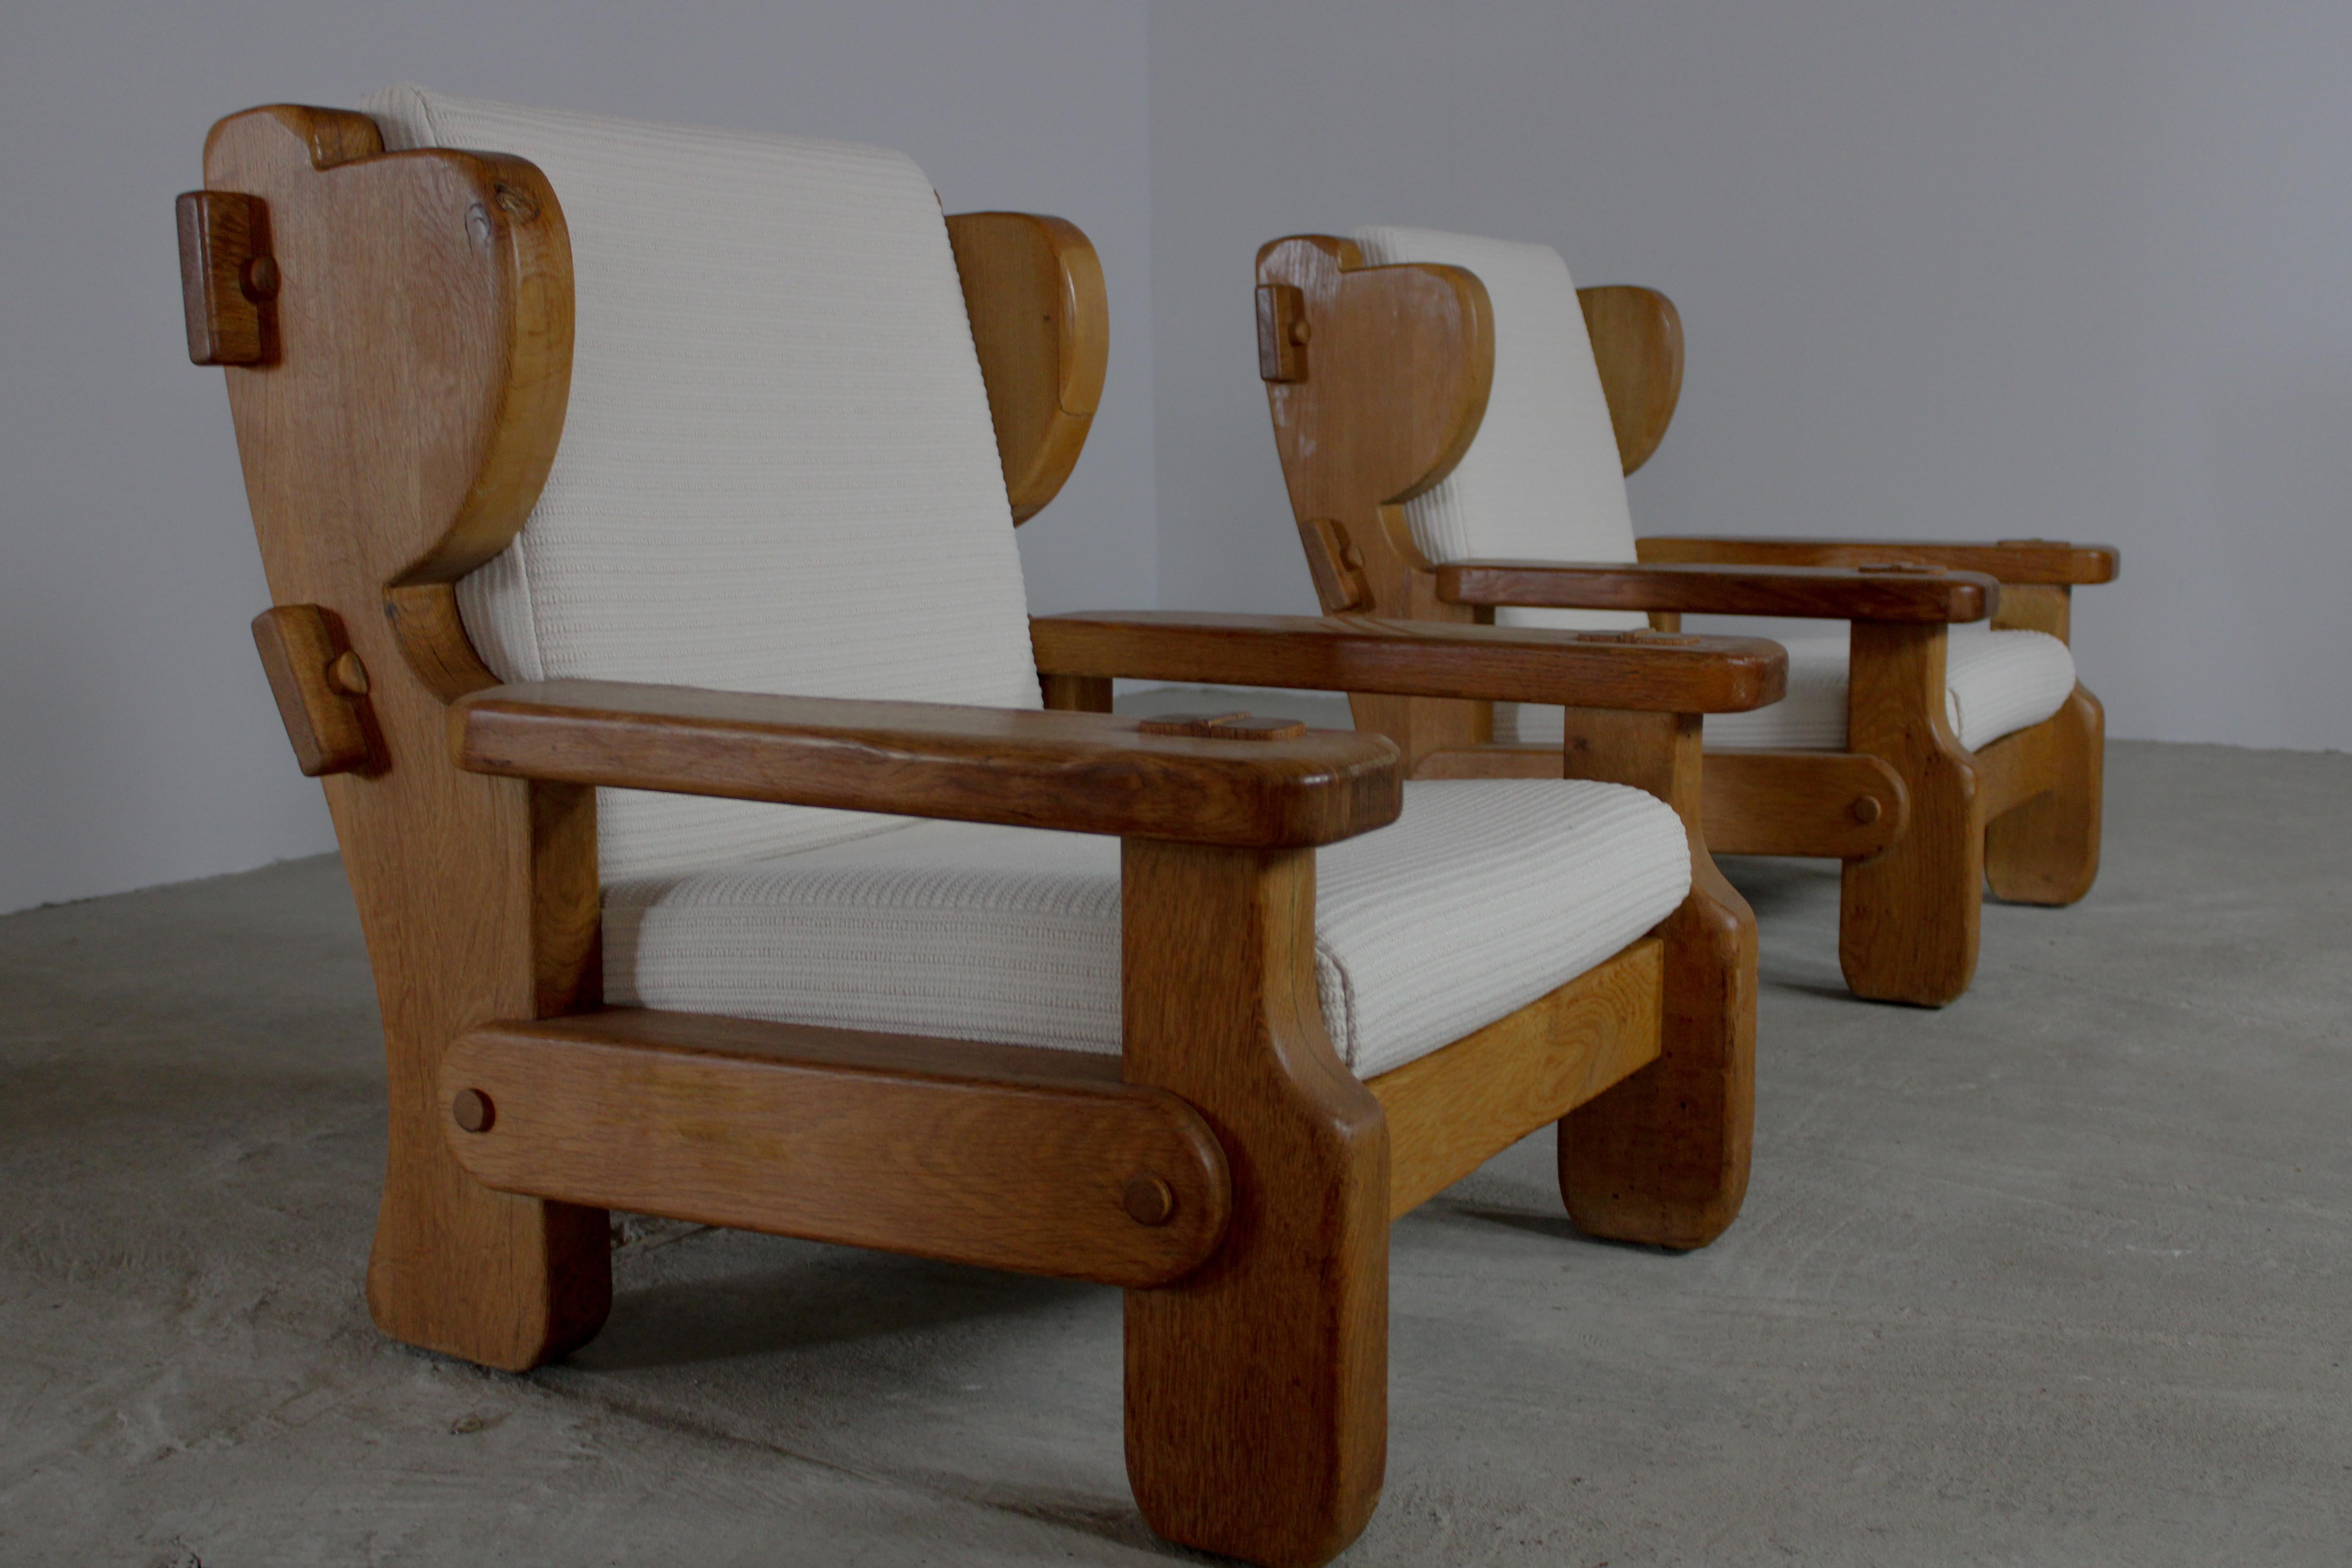 Rustic blond oak lounge chairs are a marriage of timeless elegance and rugged charm, embodying the essence of rustic sophistication. Crafted from sturdy oak wood with a light, blond finish, these chairs exude a natural warmth and inviting allure